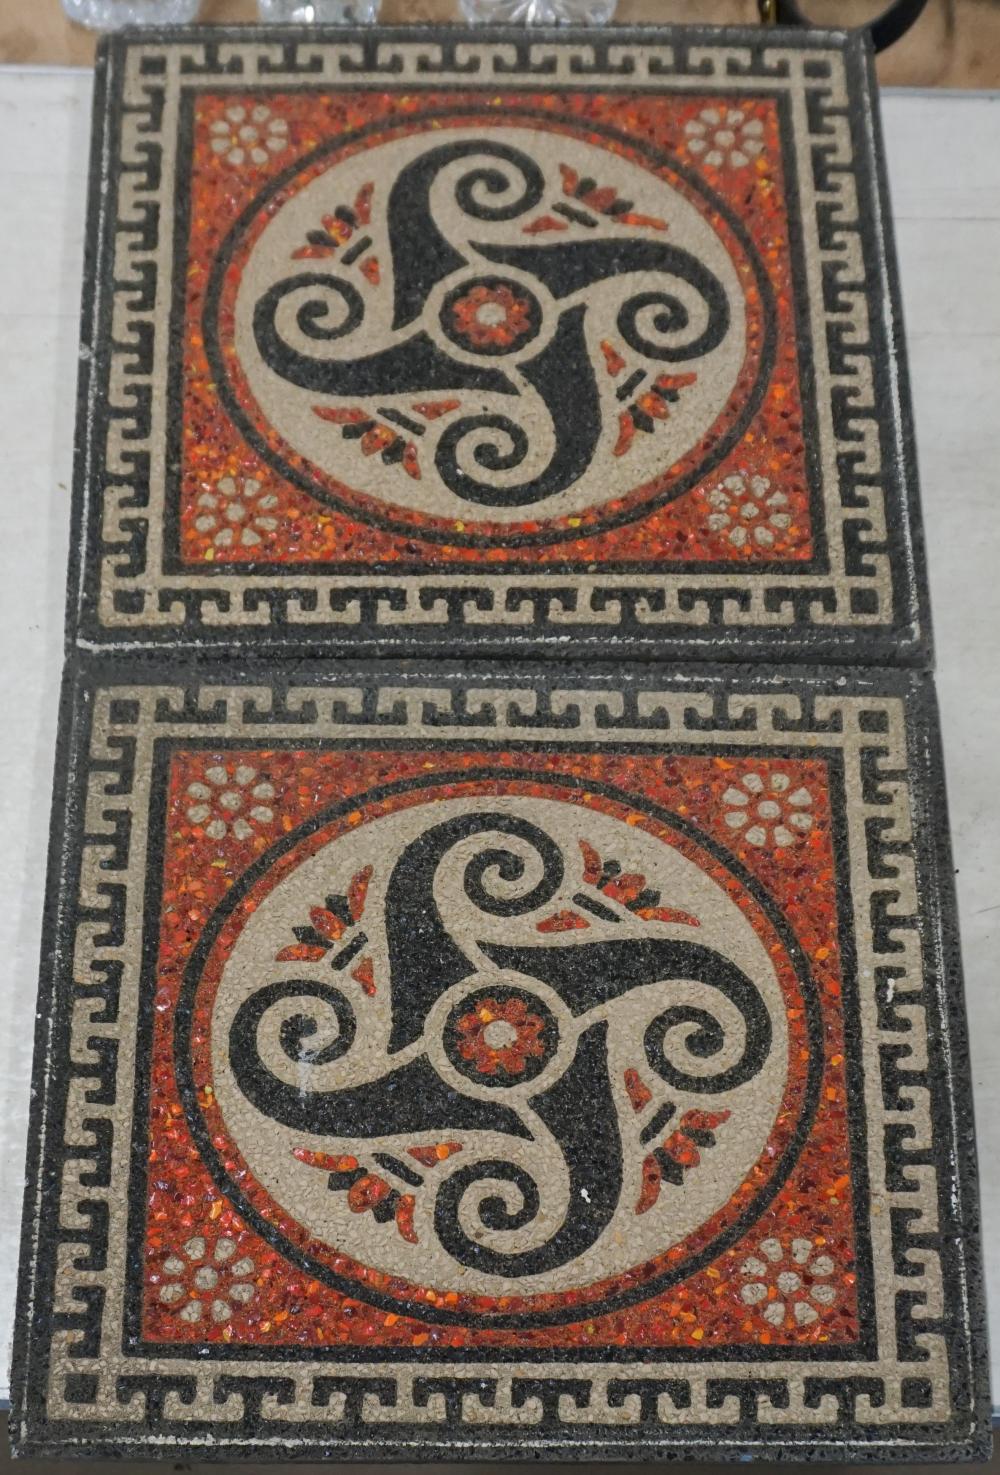 PAIR OF ARTS AND CRAFTS STYLE STONE 2e4ddd